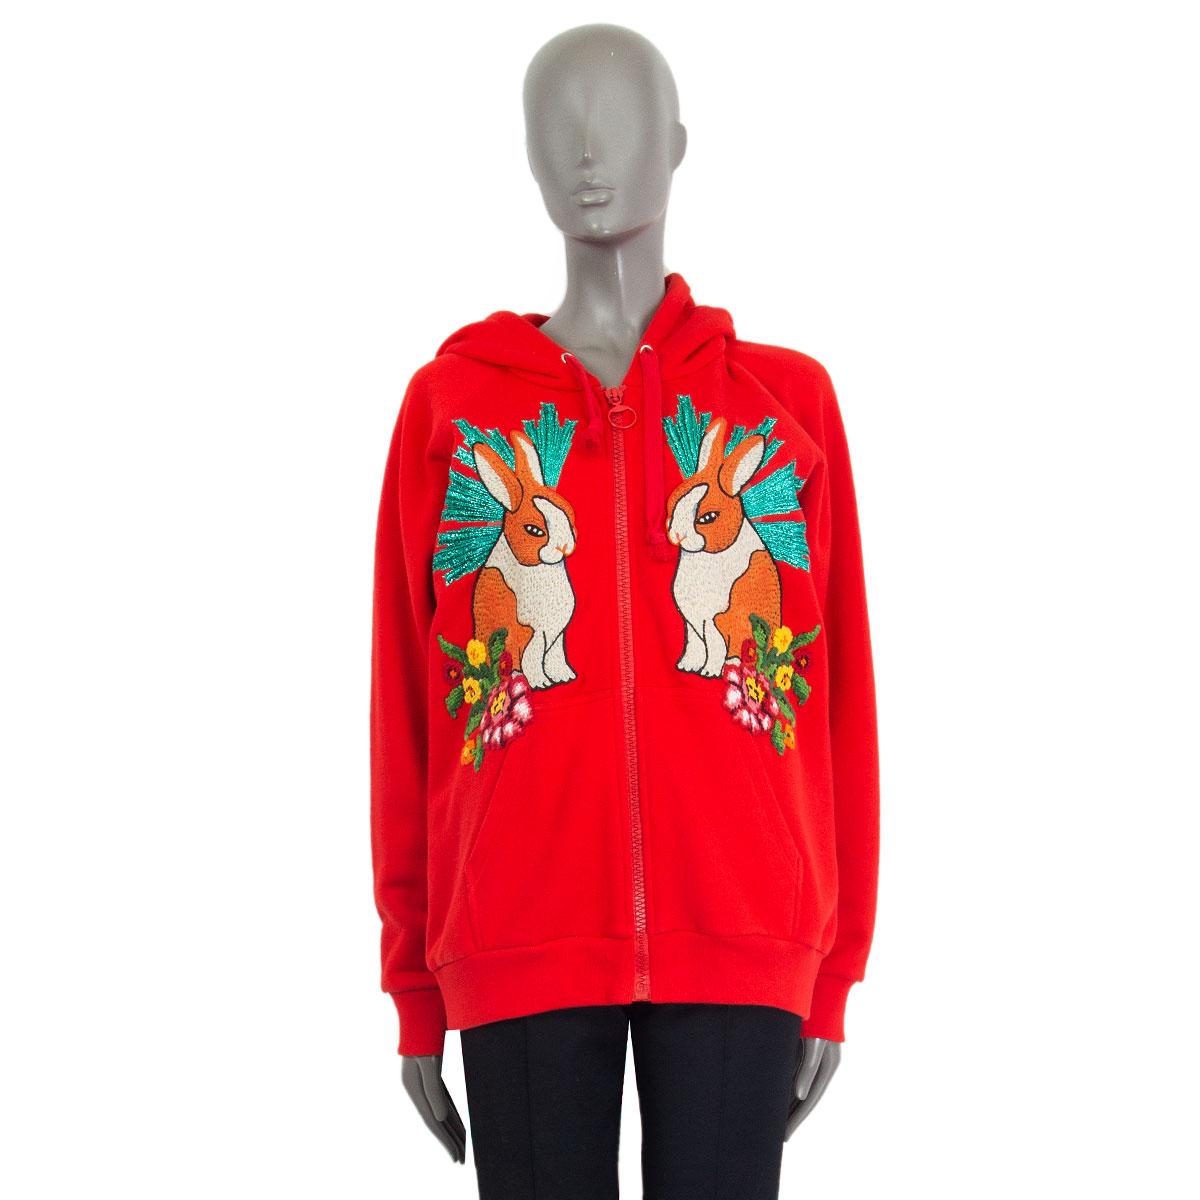 Gucci embroidered hoodie in red cotton (100%) with front pockets and long raglan sleeves. Has two rabbit embroidery details in orange, cream, grey, metallic green, yellow, pink, red and black cotton, nylon, polyethylene, polyester and silk. Closes